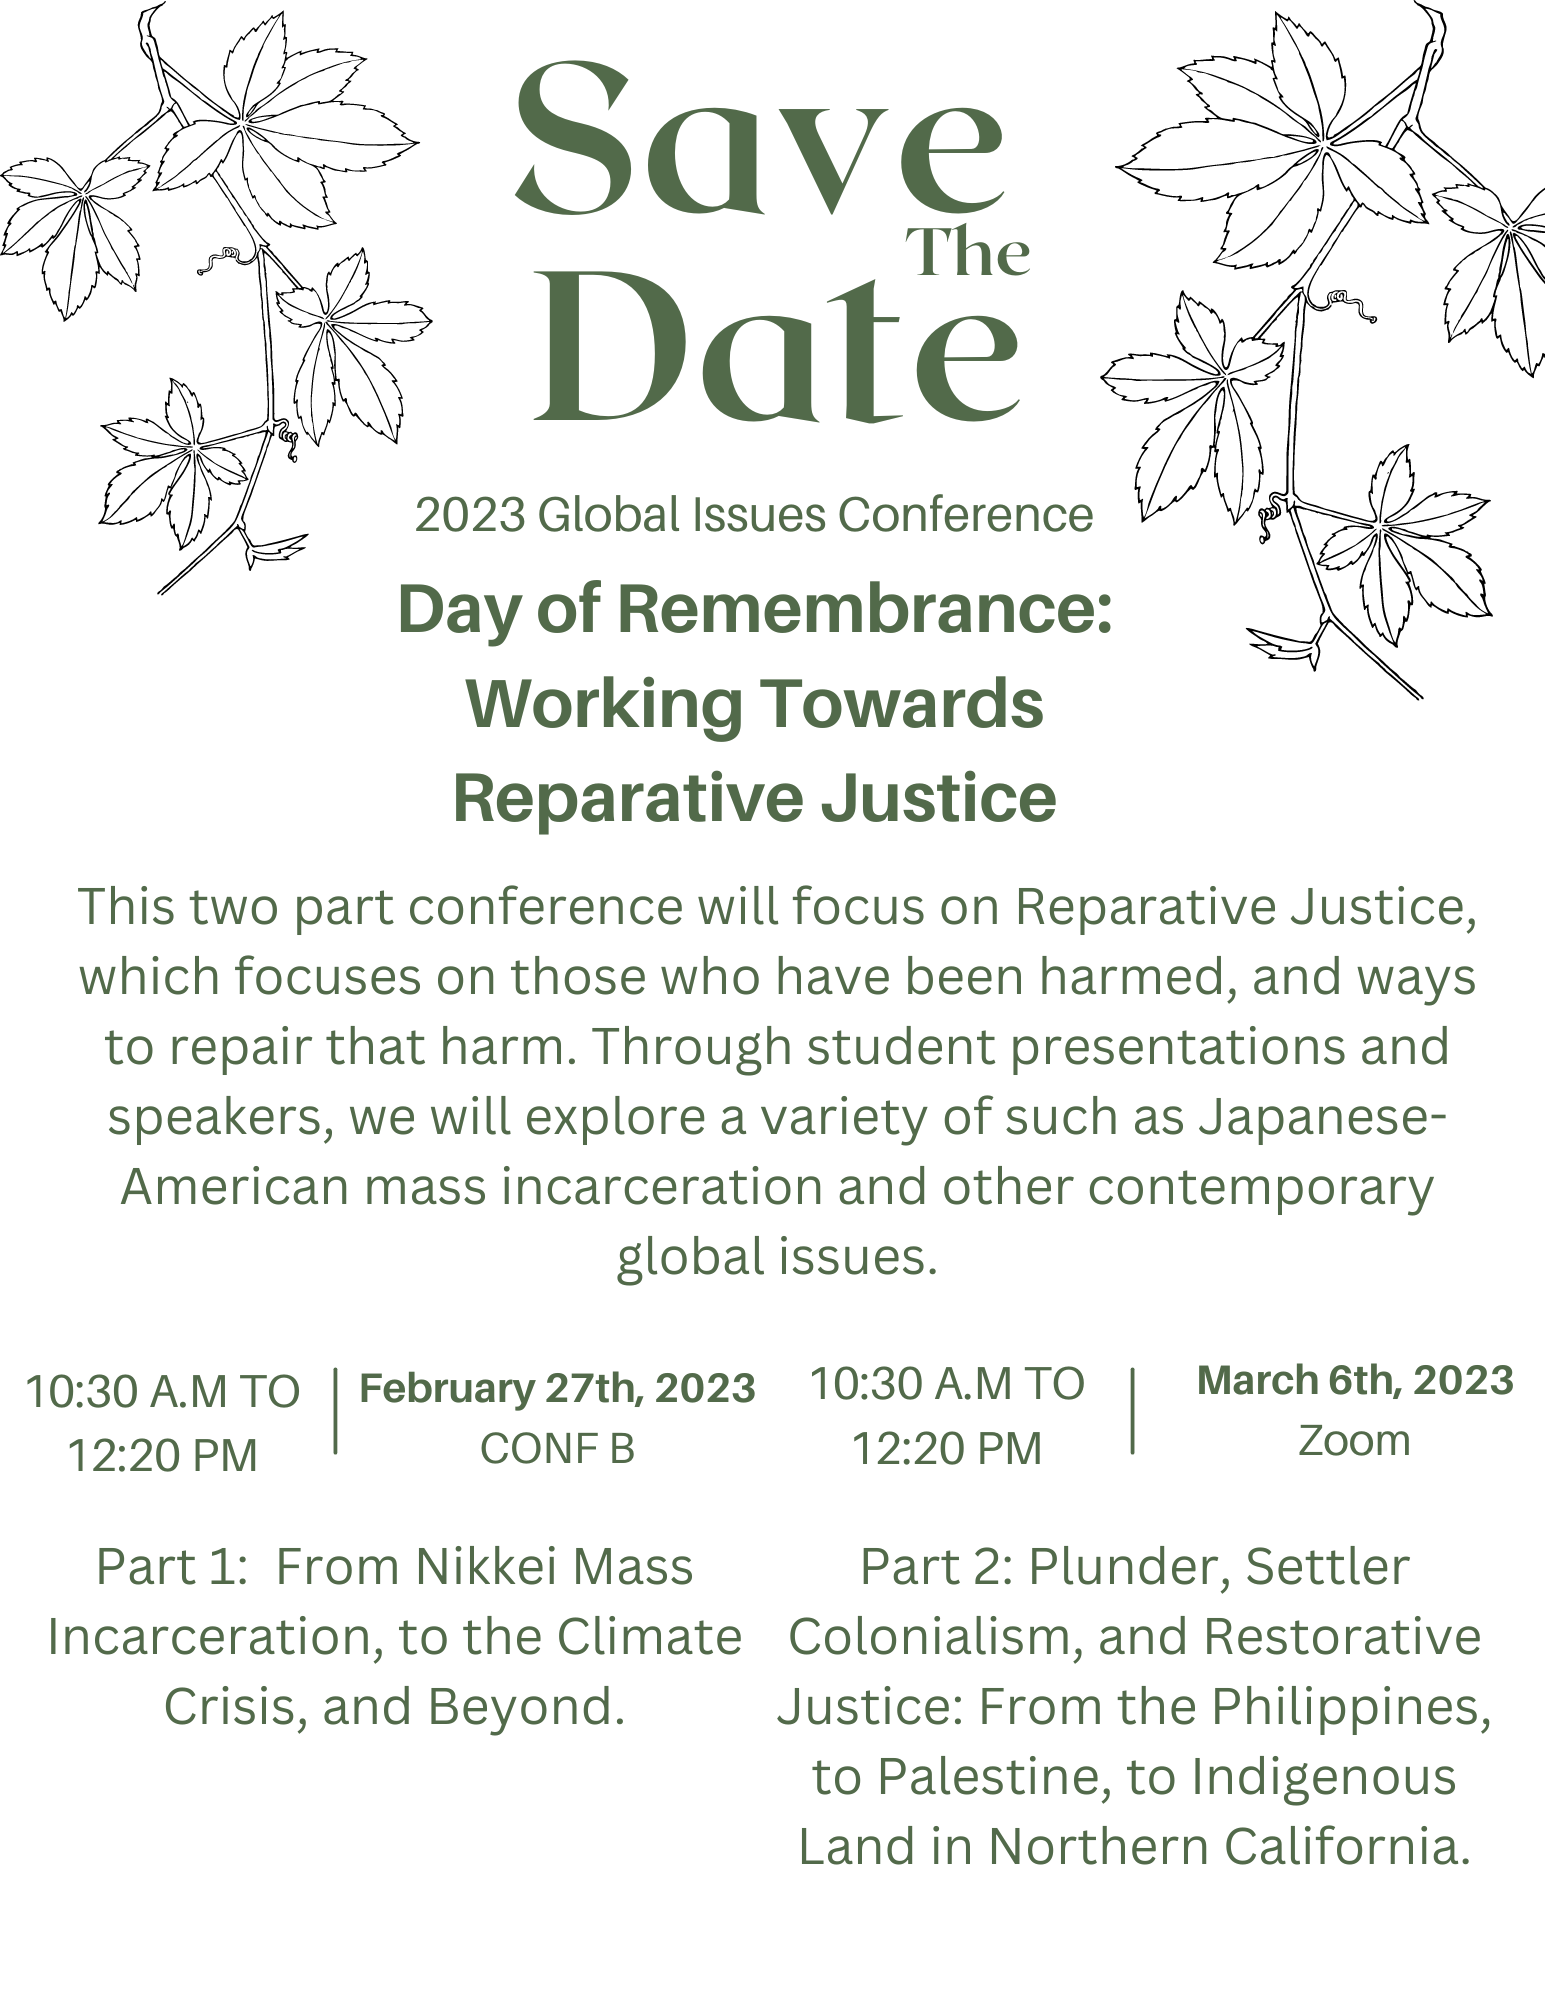 Save The Date. 2023 Global Issues Conference. Day of Remembrance: Working Towards Reparative Justice. This two part conference will focus on Reparative Justice, which focuses on those who have been harmed, and ways to repair that harm. Through student presentations and speakers, we will explore a variety of such as Japanese- American mass incarceration and other contemporary global issues. Part 1: From Nikkei Mass Incarceration, to the Climate Crisis, and Beyond. On February 27th from 10:30 A.M. to 12:20 P.M. in CONF B. Part 2: Plunder, Settler Colonialism, and Restorative Justice: From the Philippines, to Palestine, to Indigenous Land in Northern California. On March 6th on zoom. 